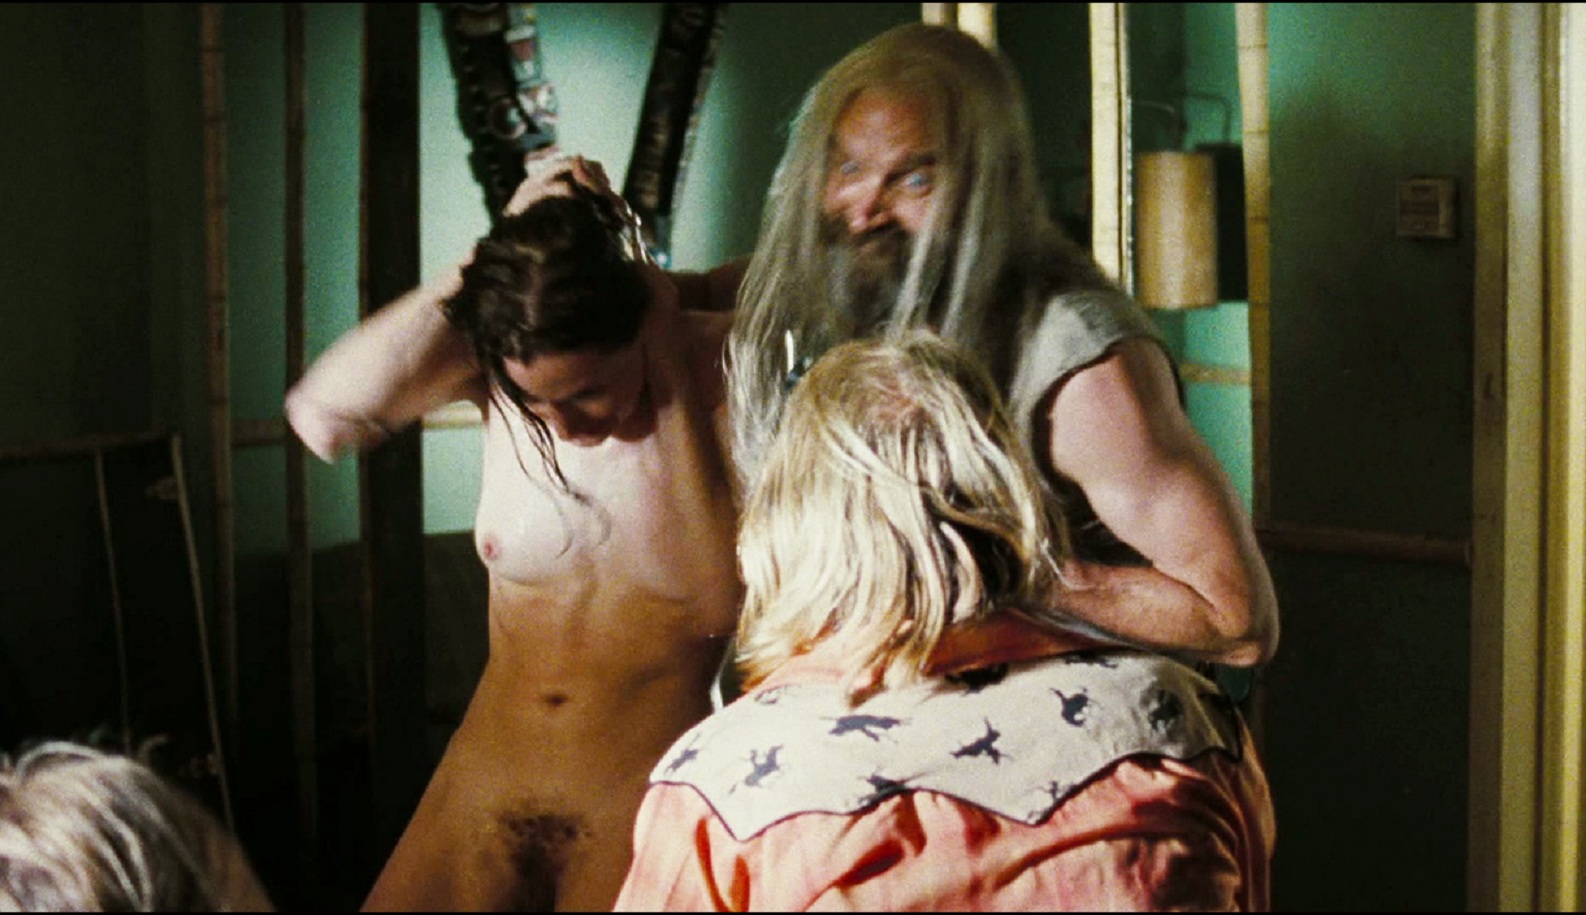 The Devil's Rejects nude pics.